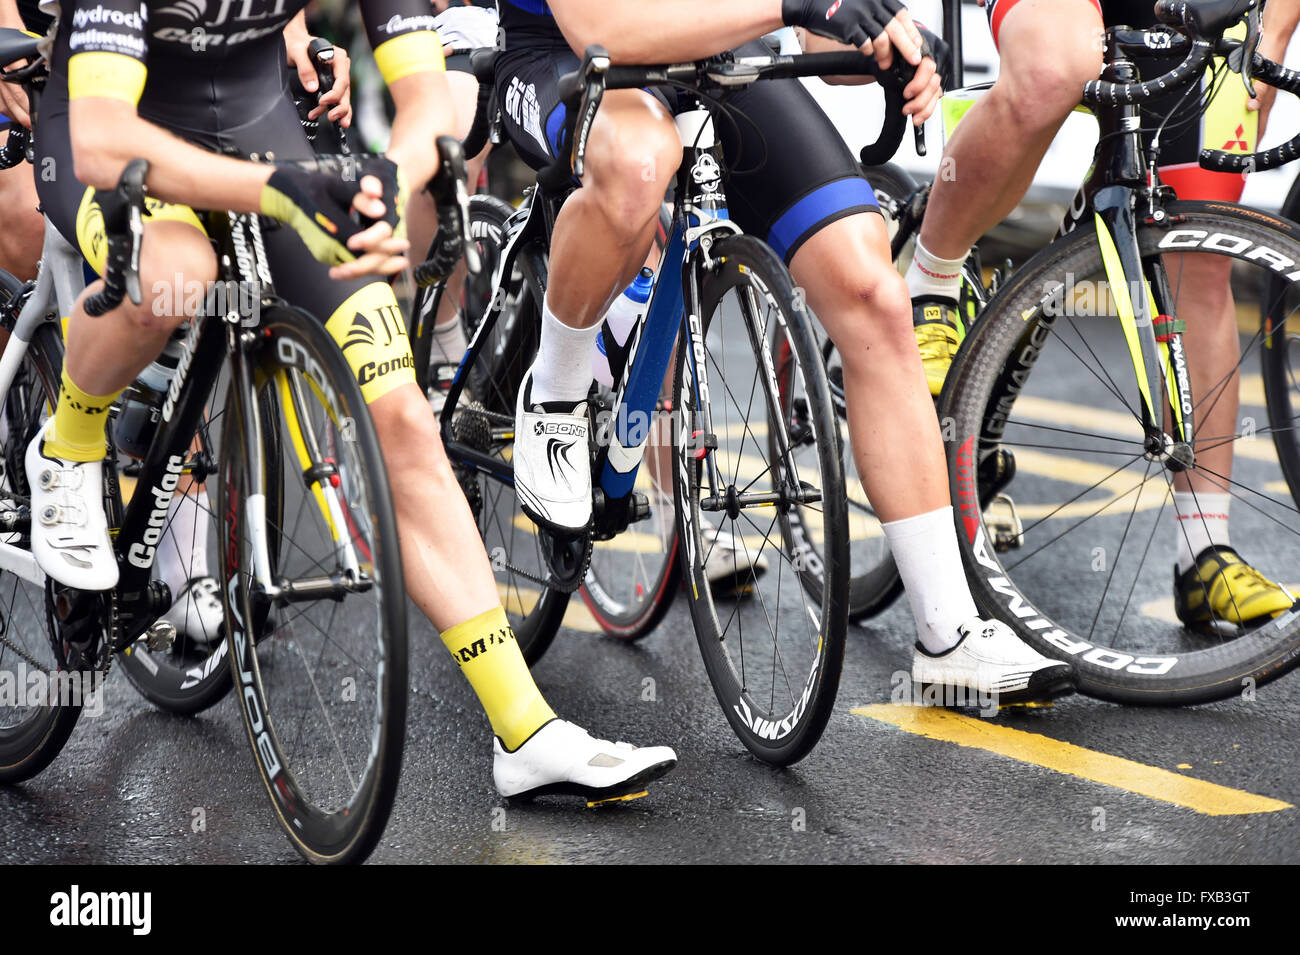 Shiny shaved legs at a road cycling race, Skipton Yorkshire UK Stock Photo